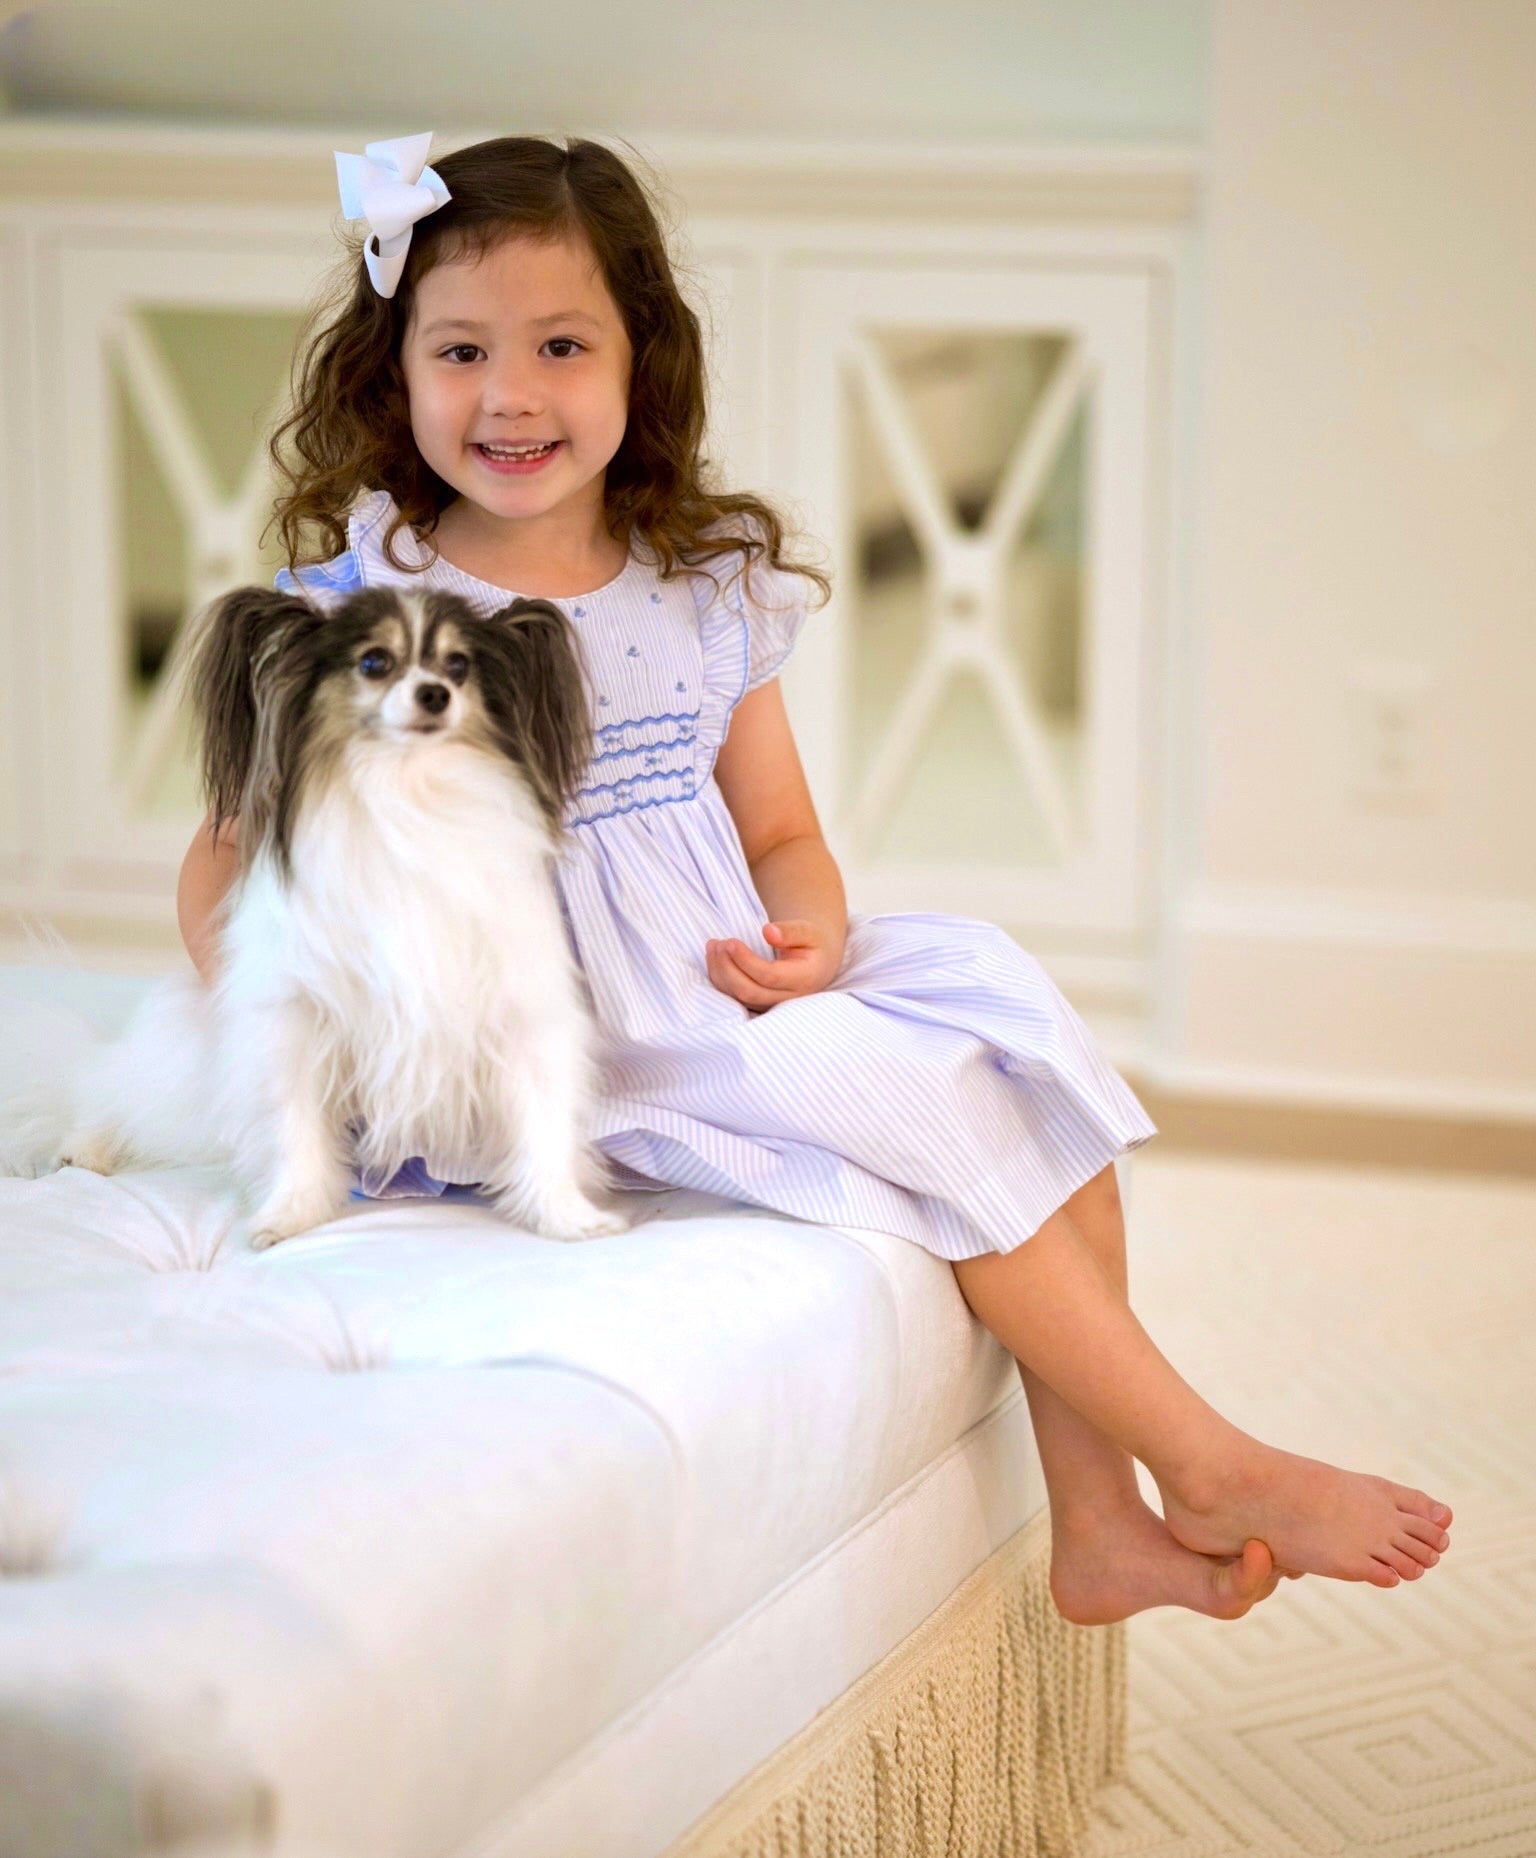 Pet and child dog papillon portrait smocked dress charlotte sy Dimby shari ford